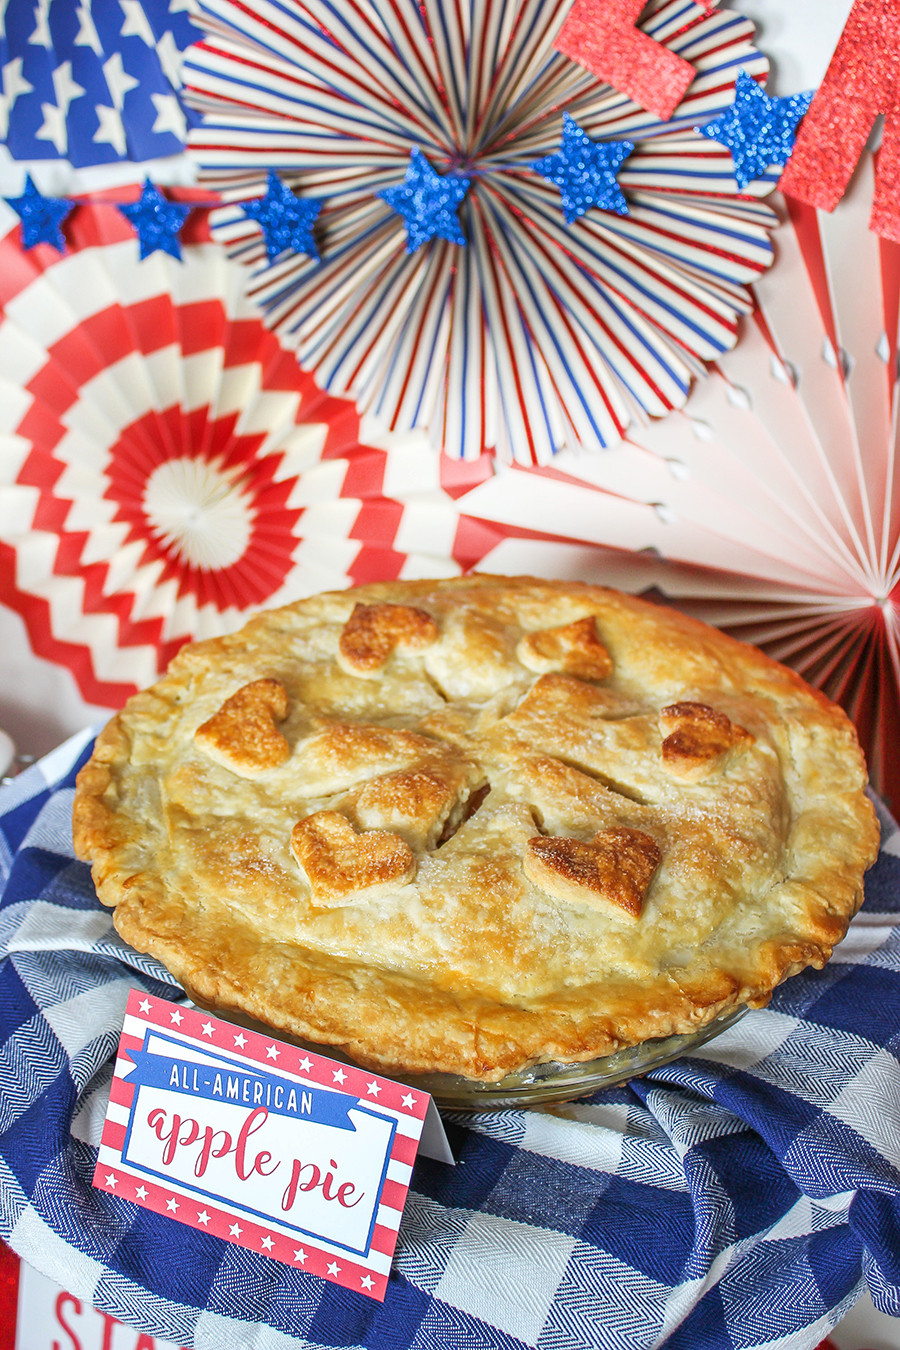 Apple Pie 4Th Of July
 The Best Apple Pie Recipe — Perfect for 4th of July